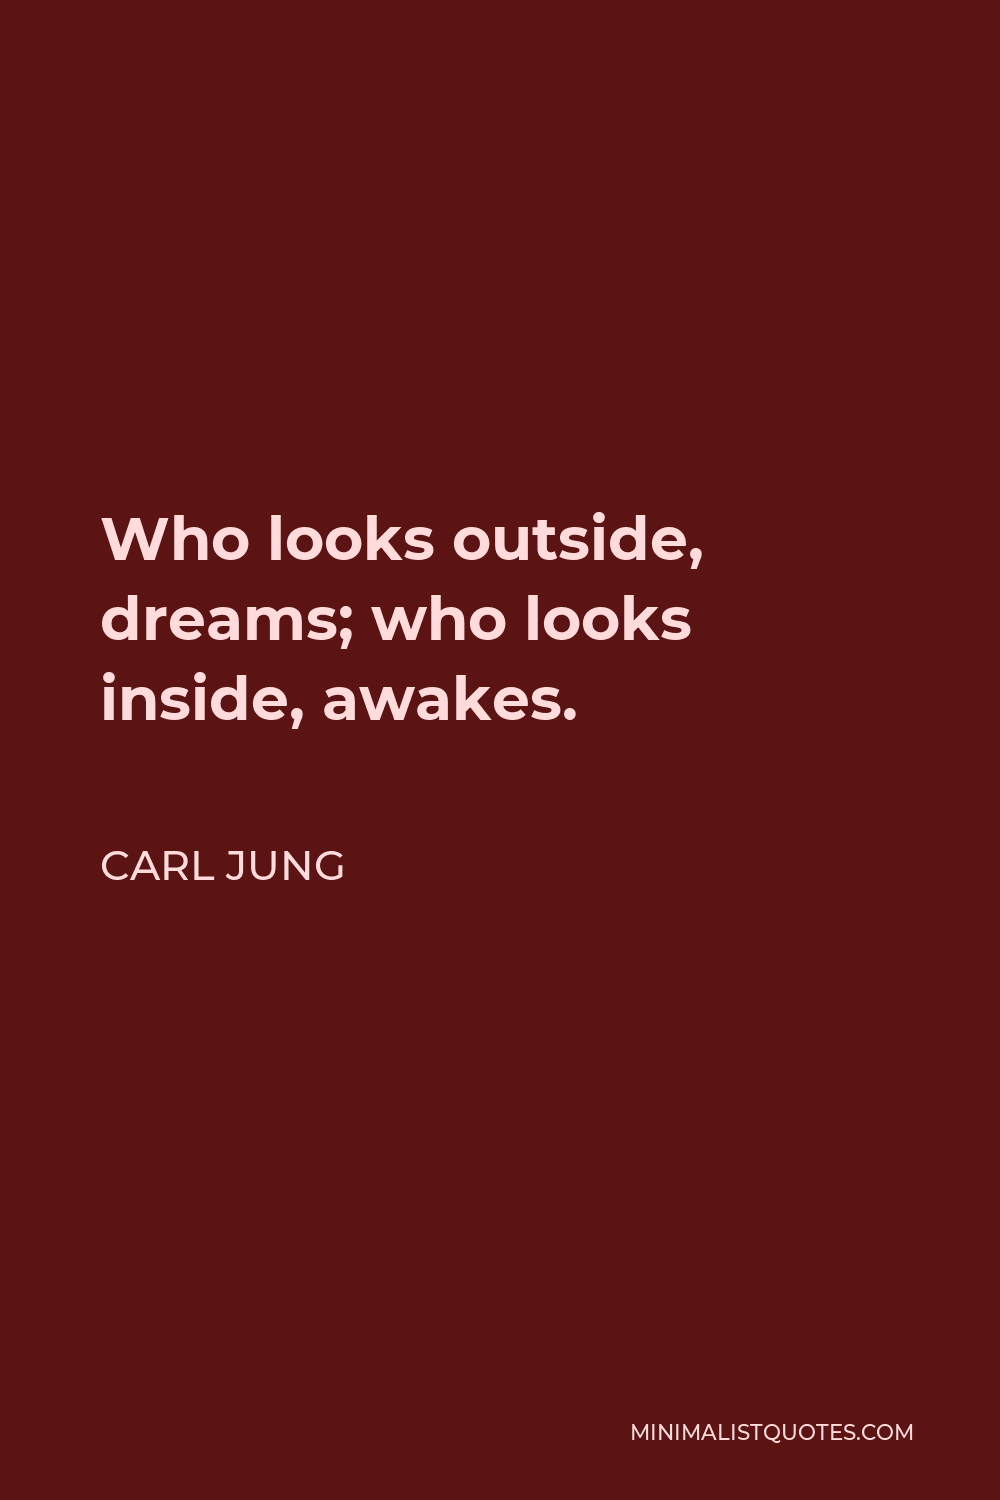 Carl Jung Quote - Who looks outside, dreams; who looks inside, awakes.